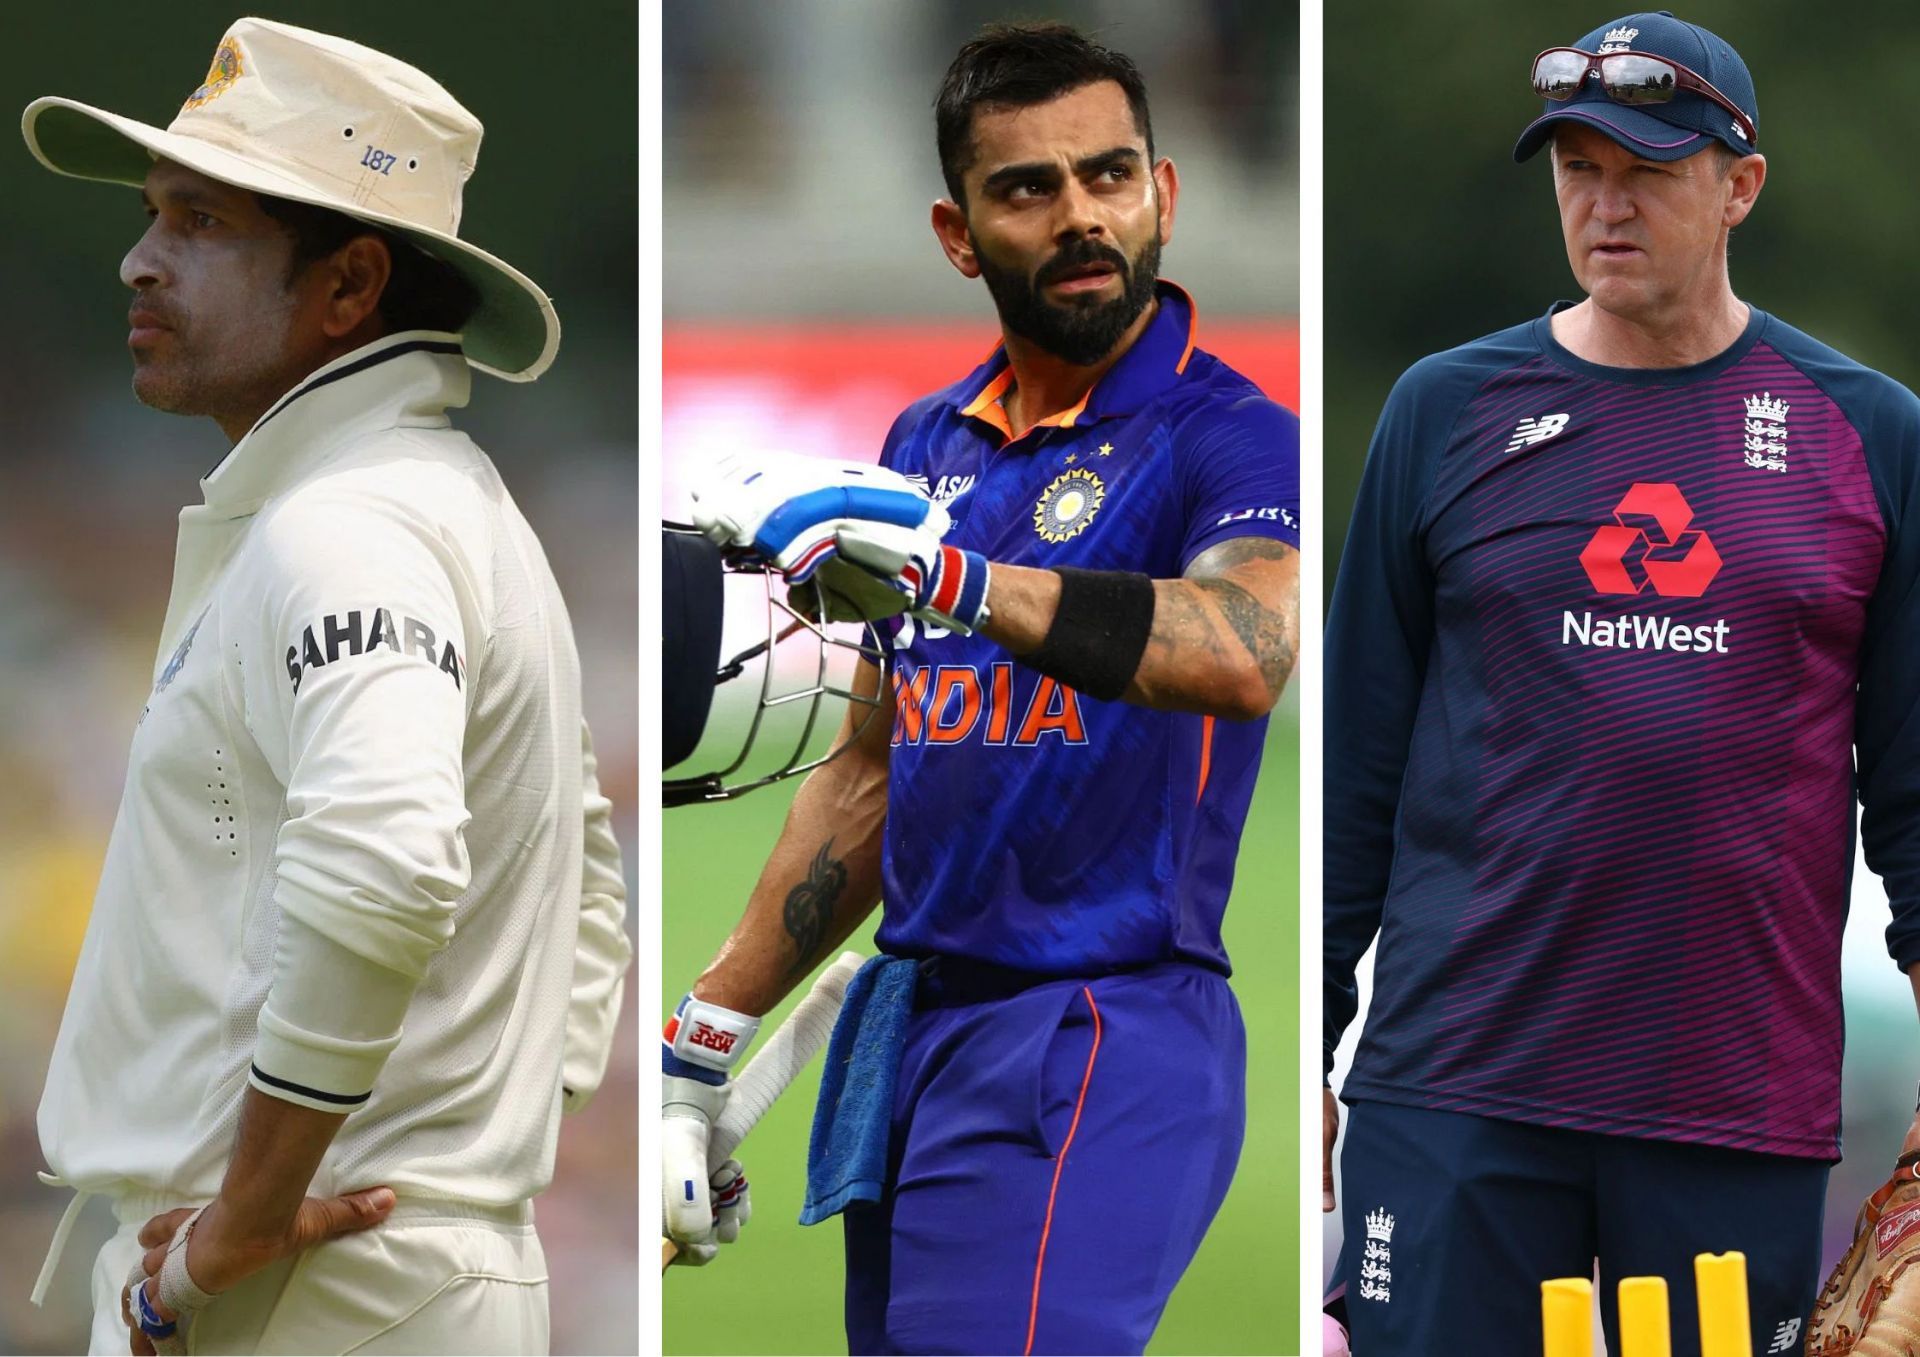 Sachin Tendulkar, Virat Kohli and Andy Flower have all experienced a century drought during their respective careers